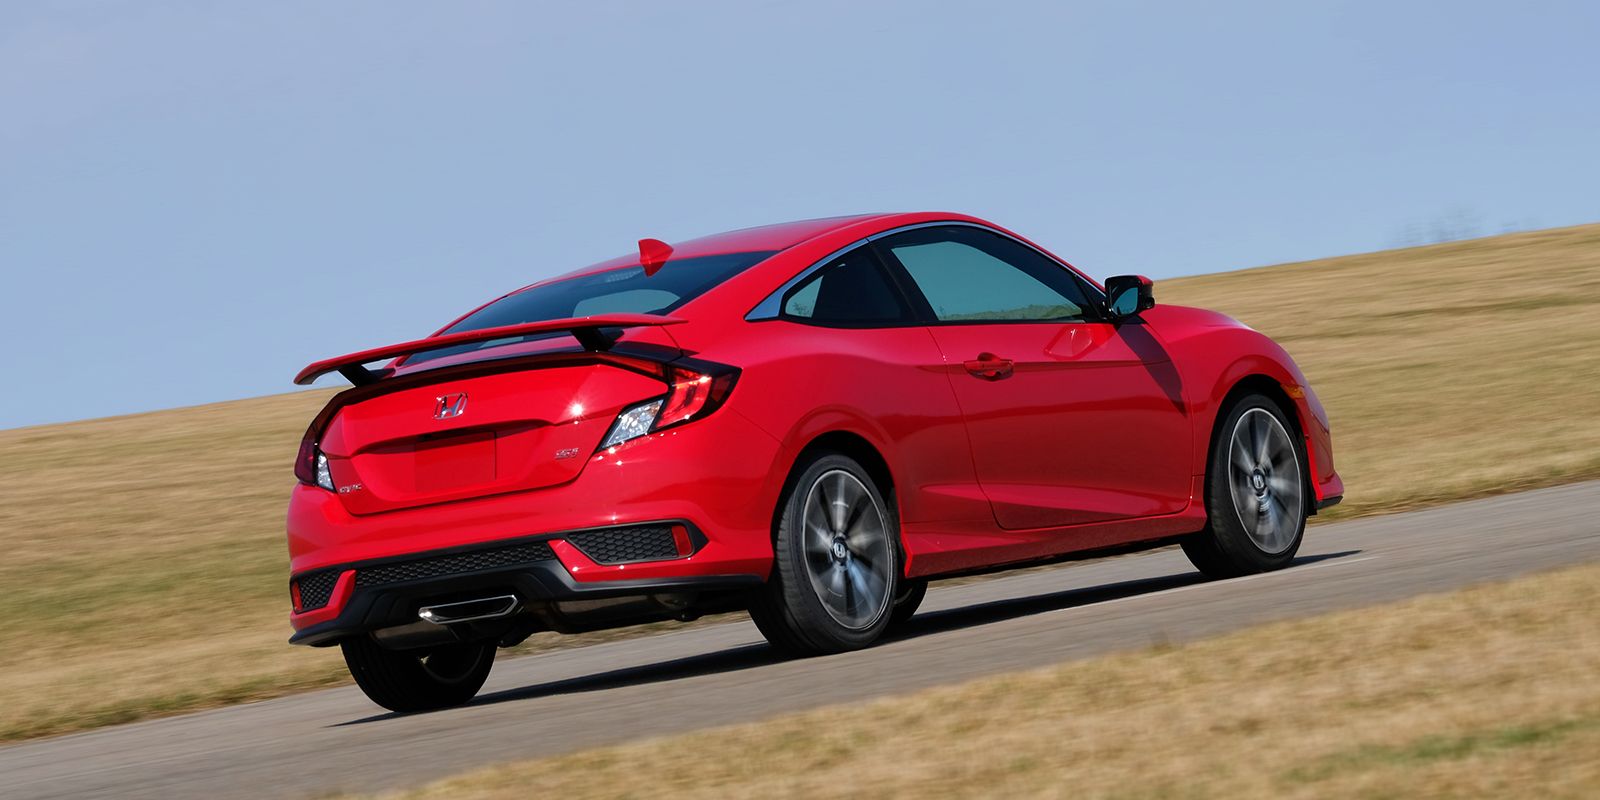 2017 Civic Si Pricing – Base Price For 2017 Civic Si Coupe & Sedan is $23,900